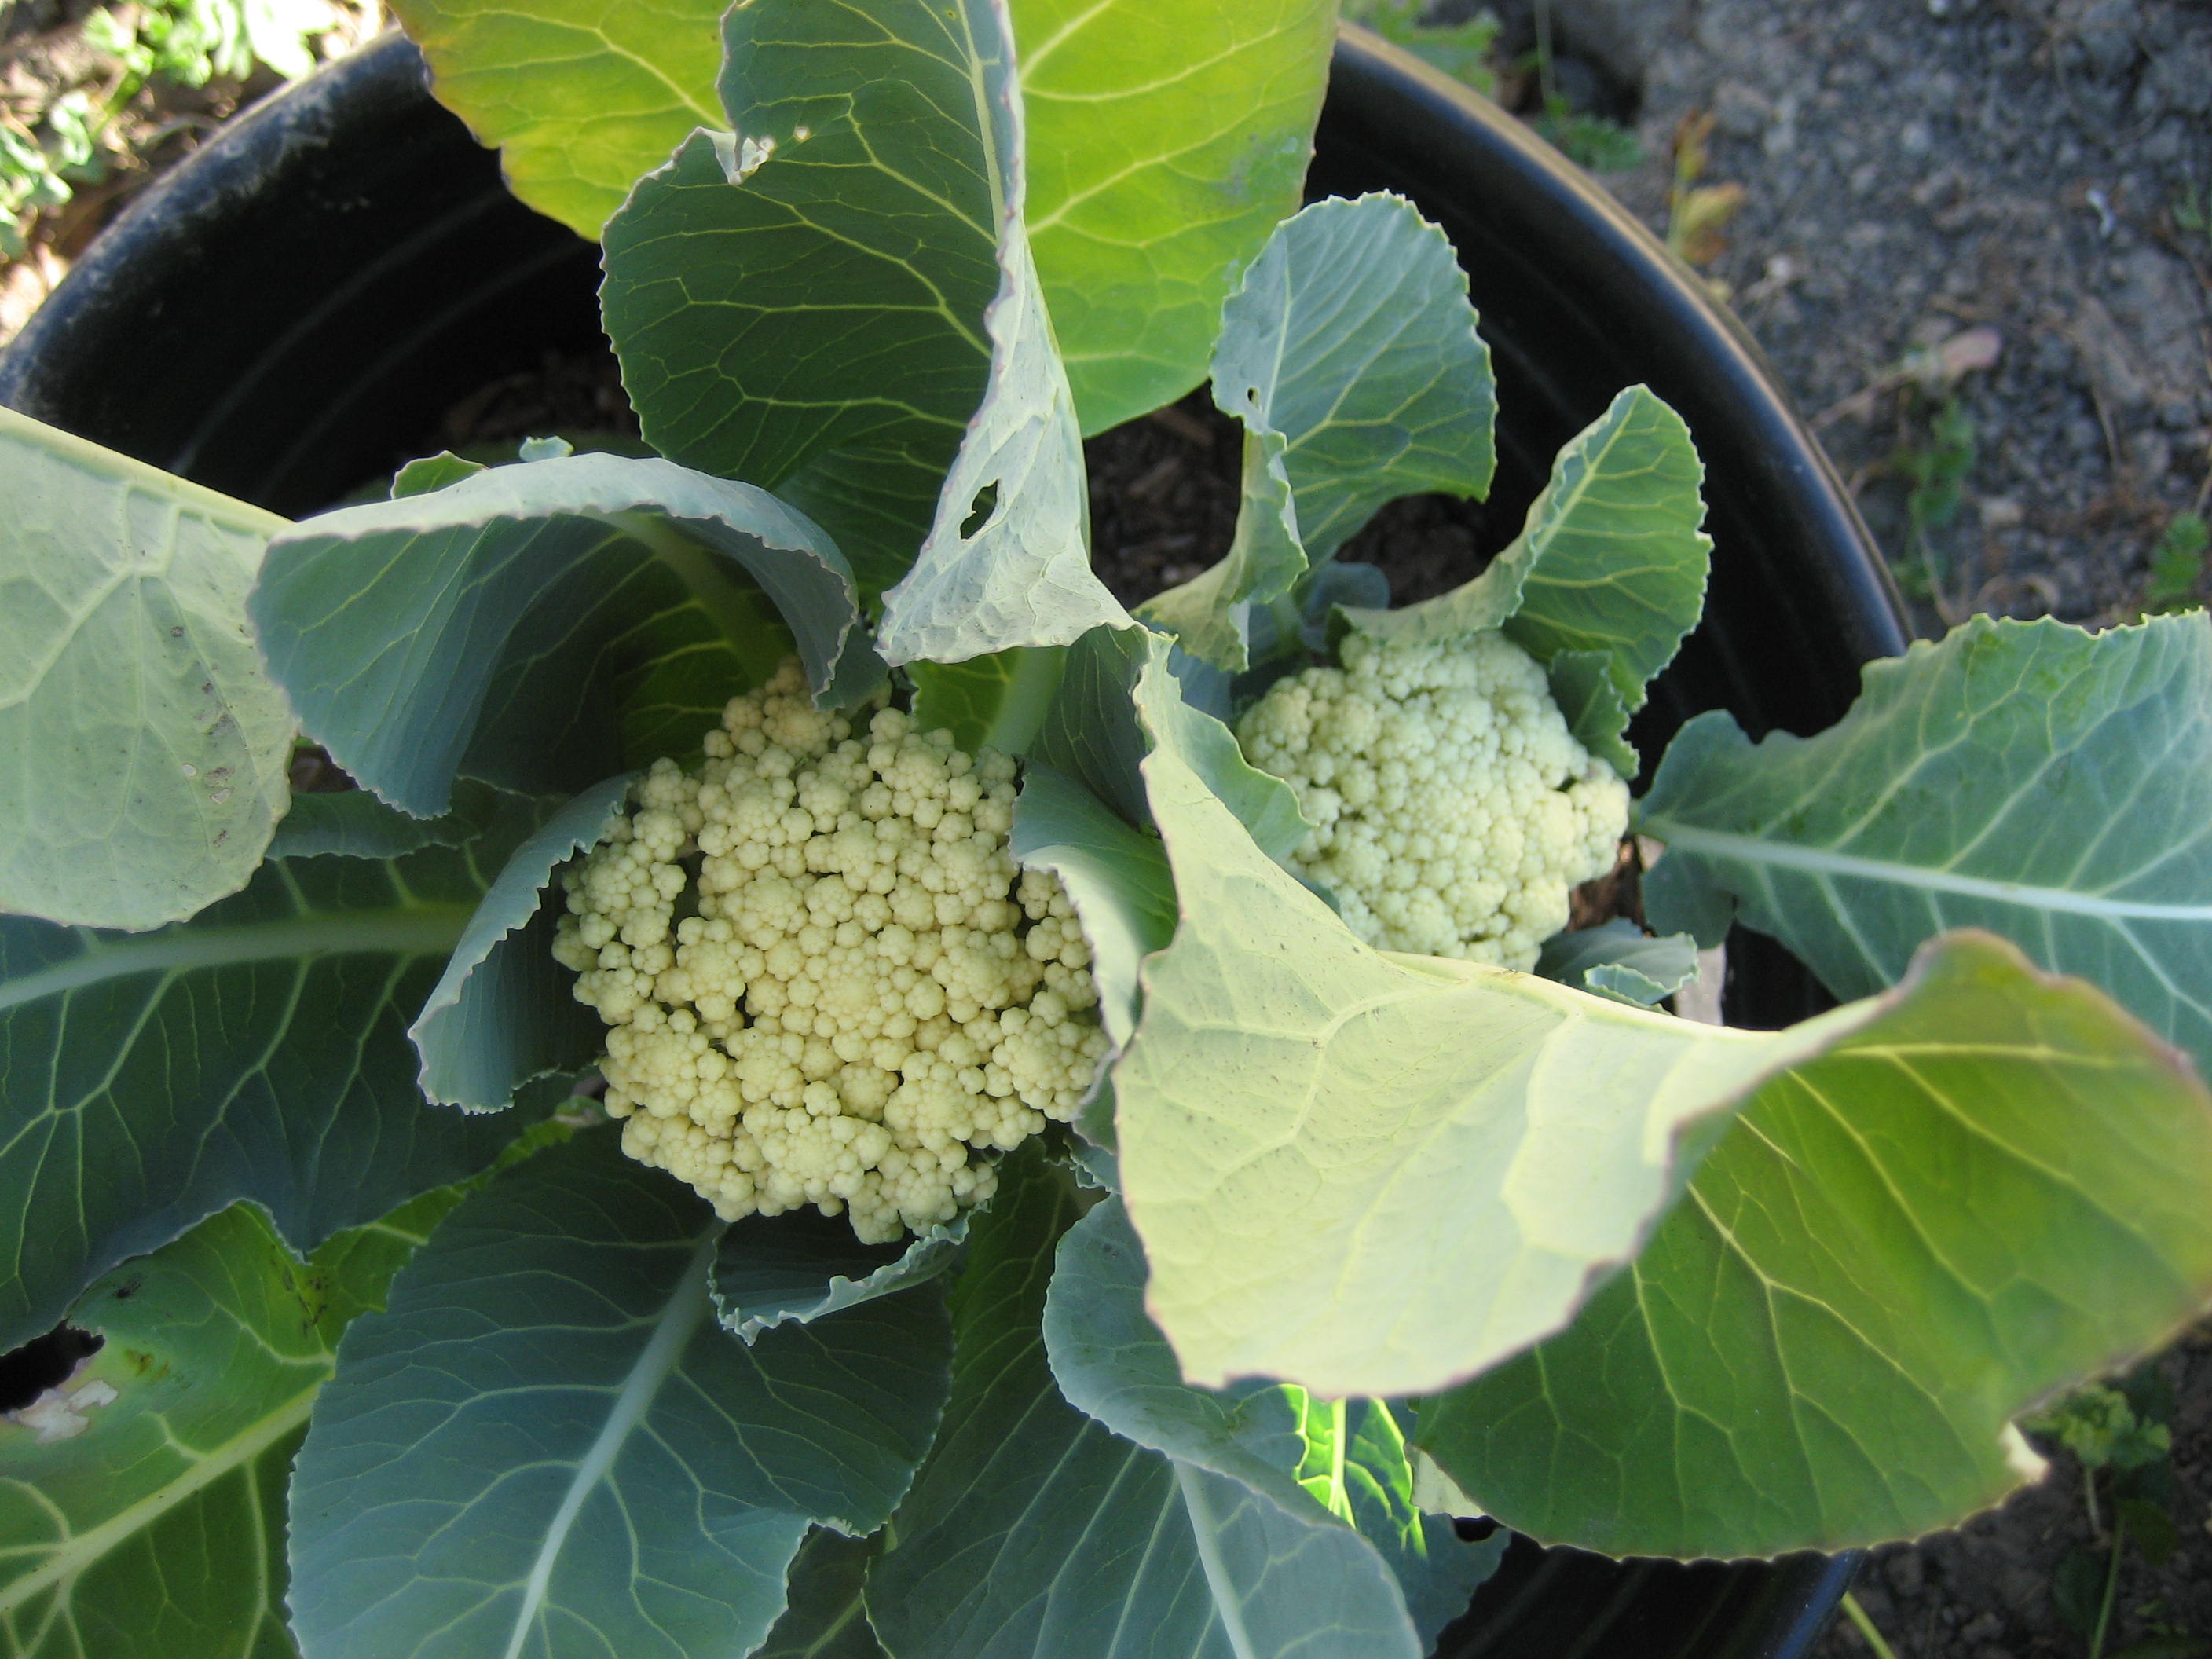 Growing Cauliflower in a Container